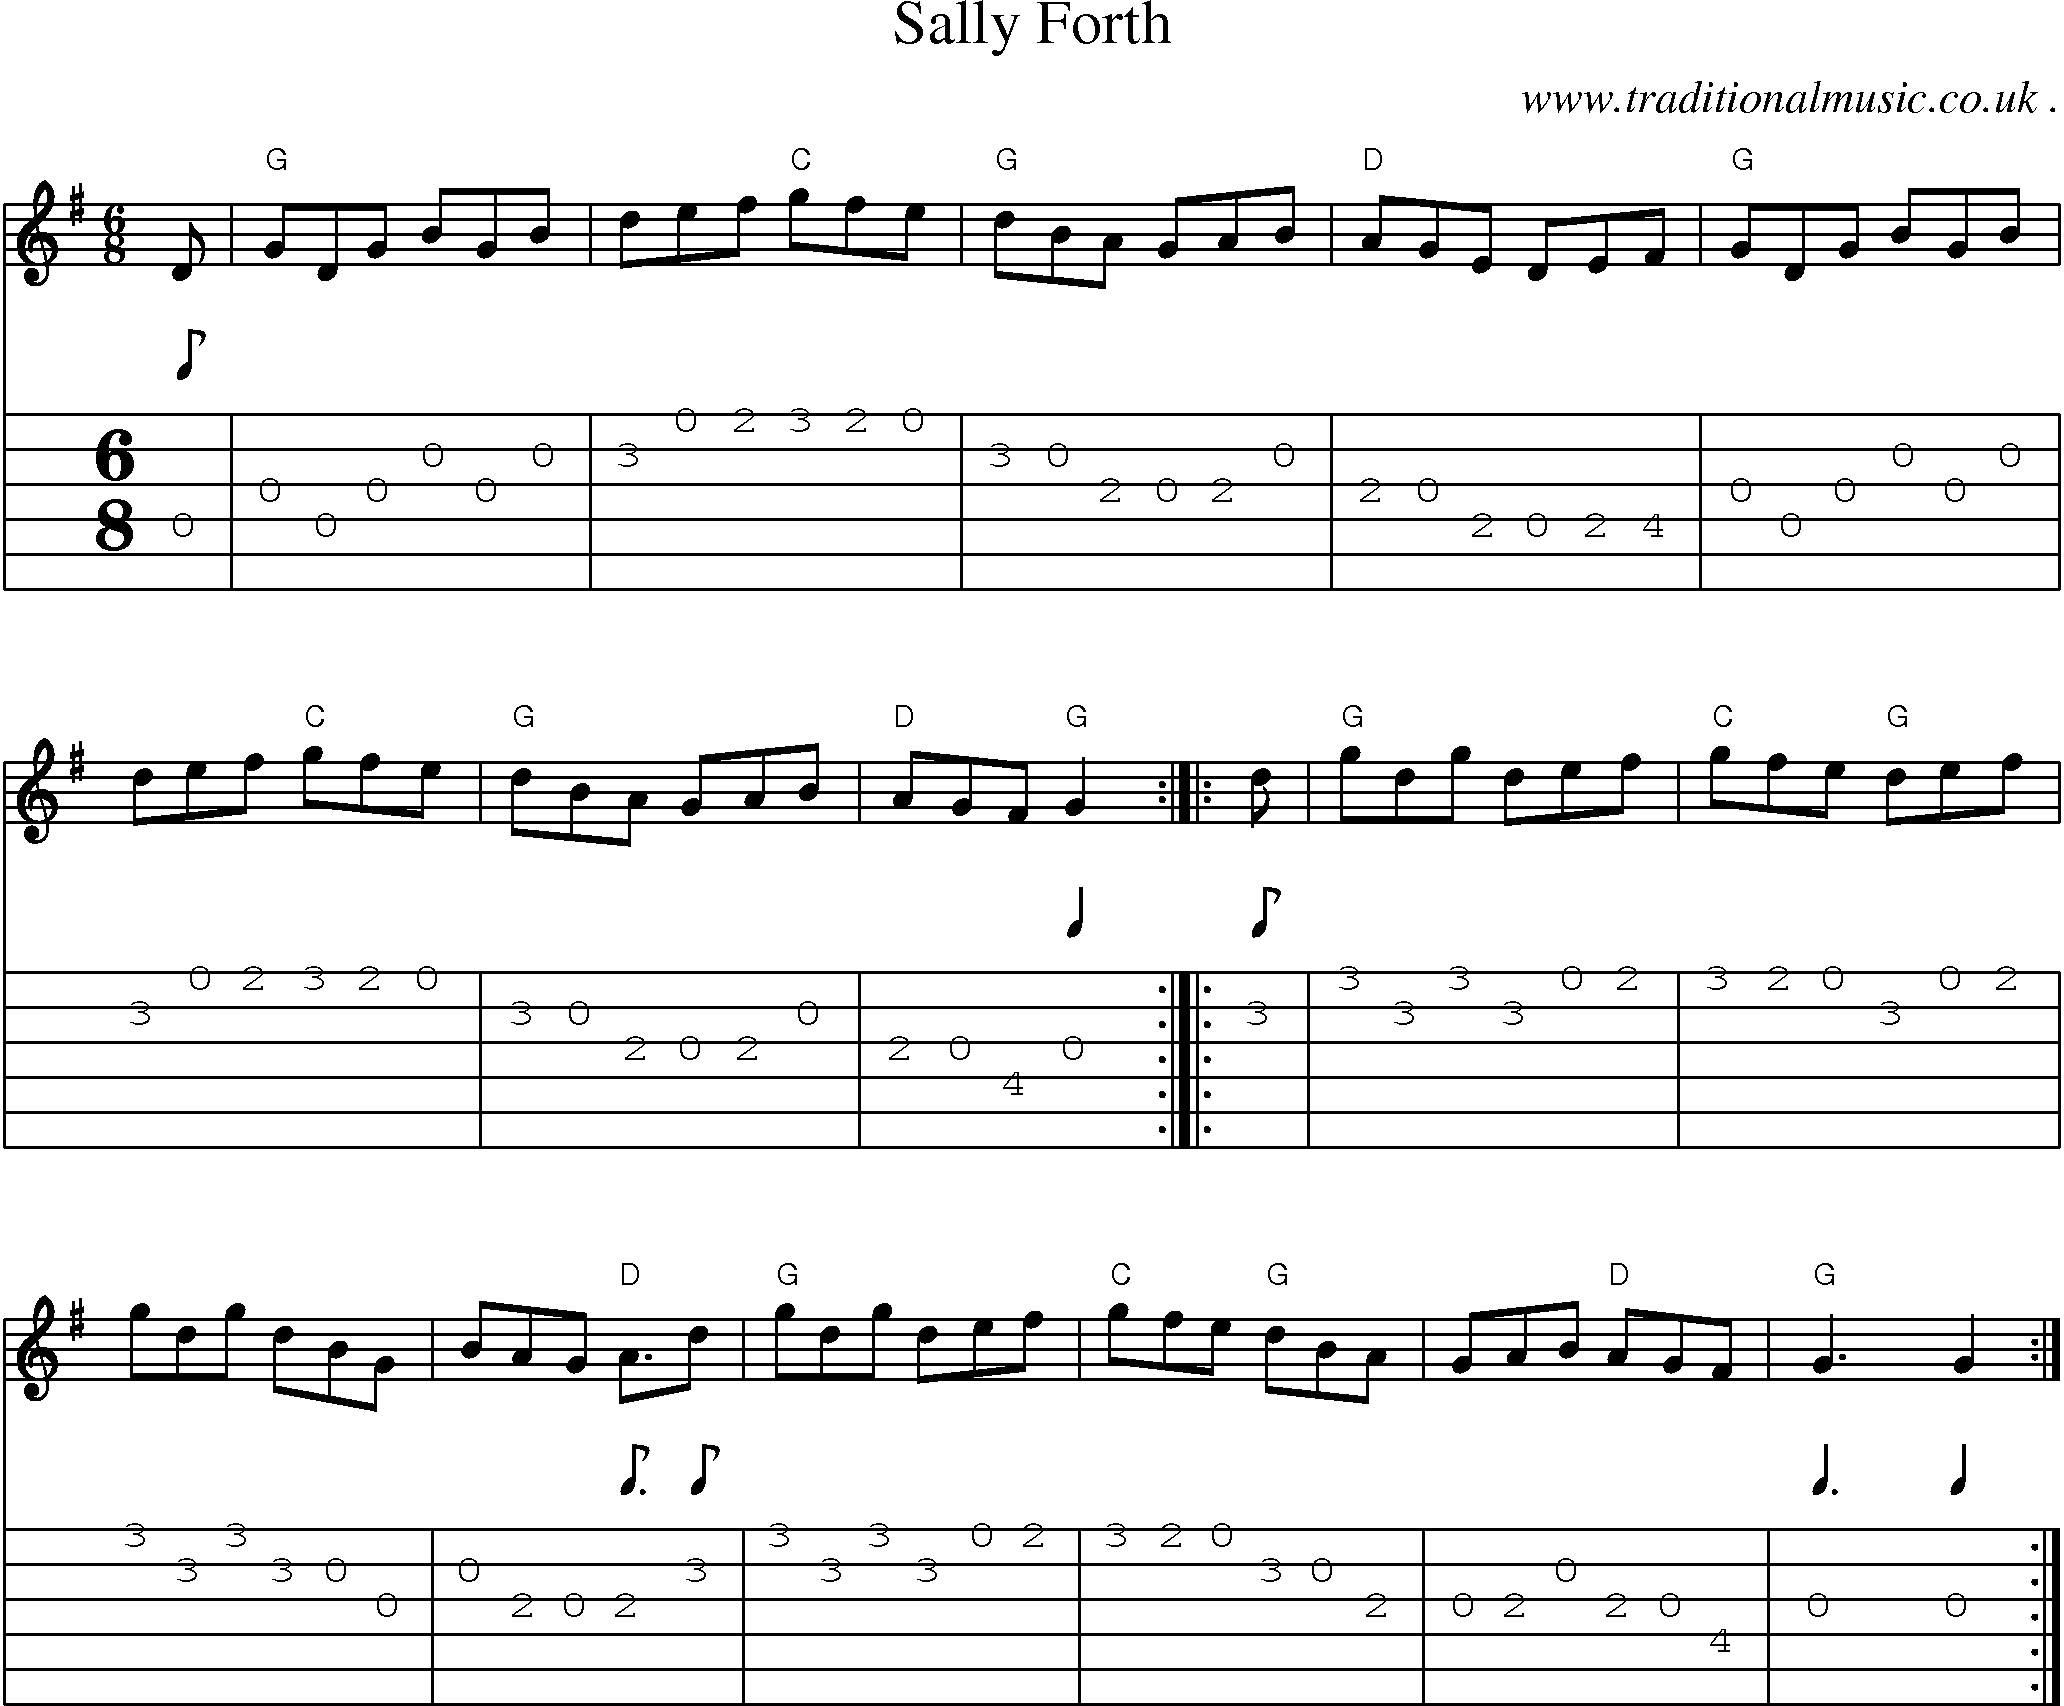 Music Score and Guitar Tabs for Sally Forth